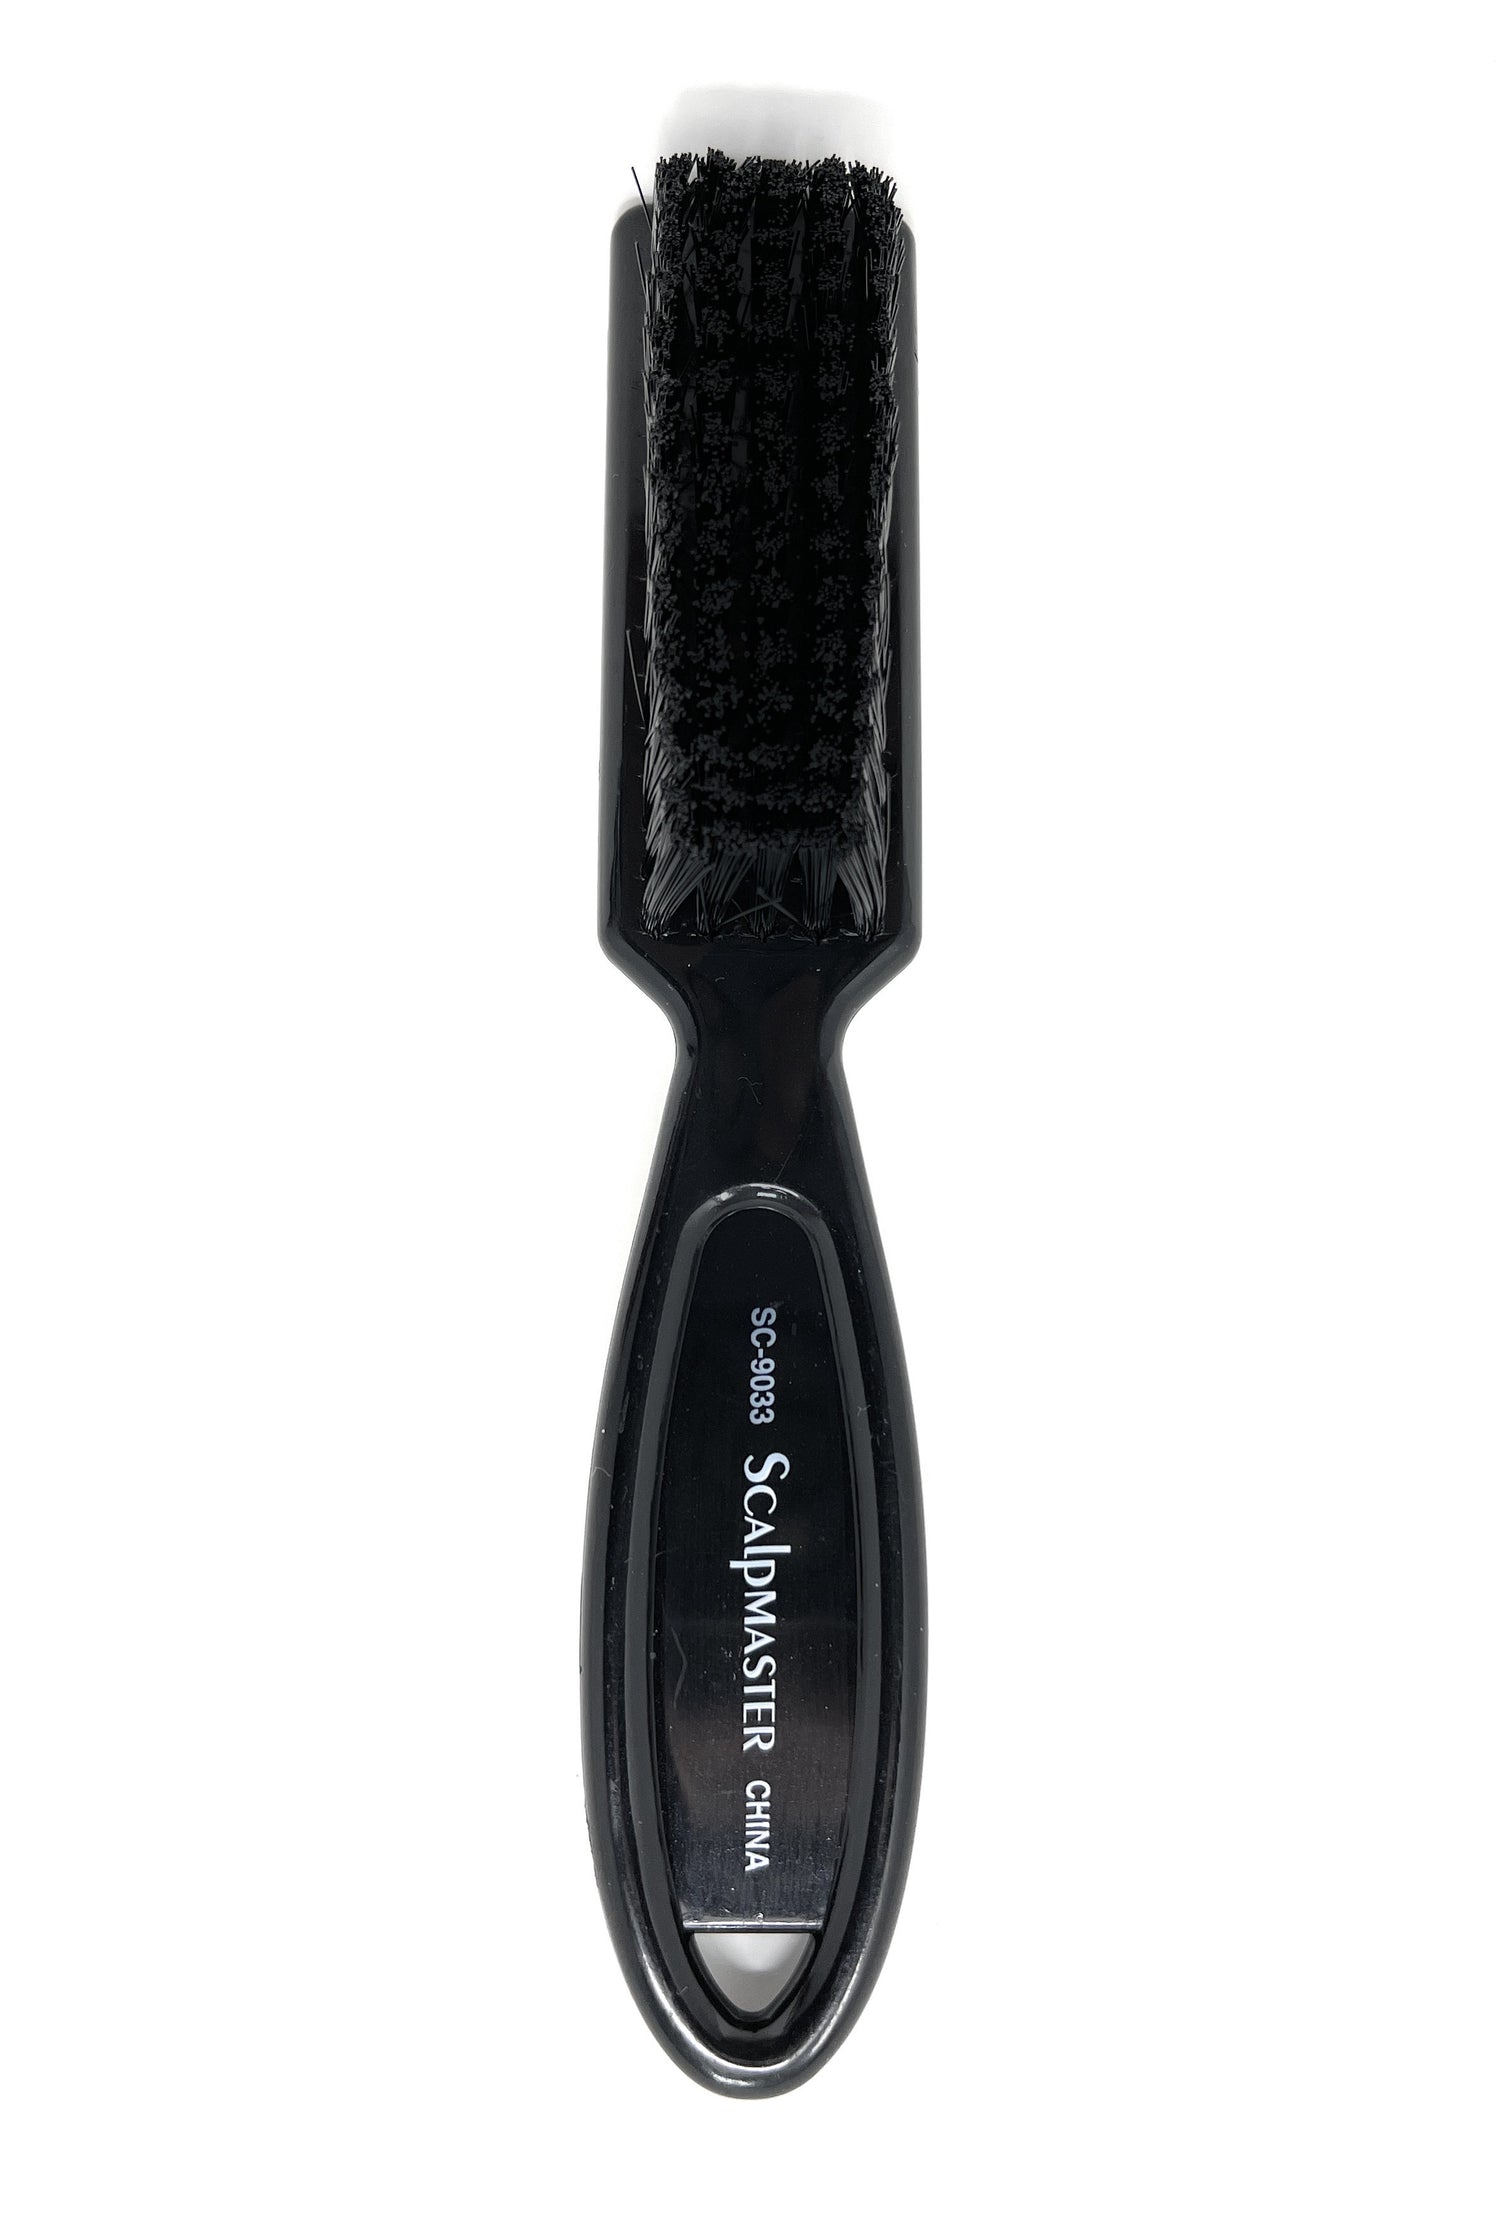 Scalpmaster Hair Brush Cleaning Tool Comb Cleaning Mini Hair Brush